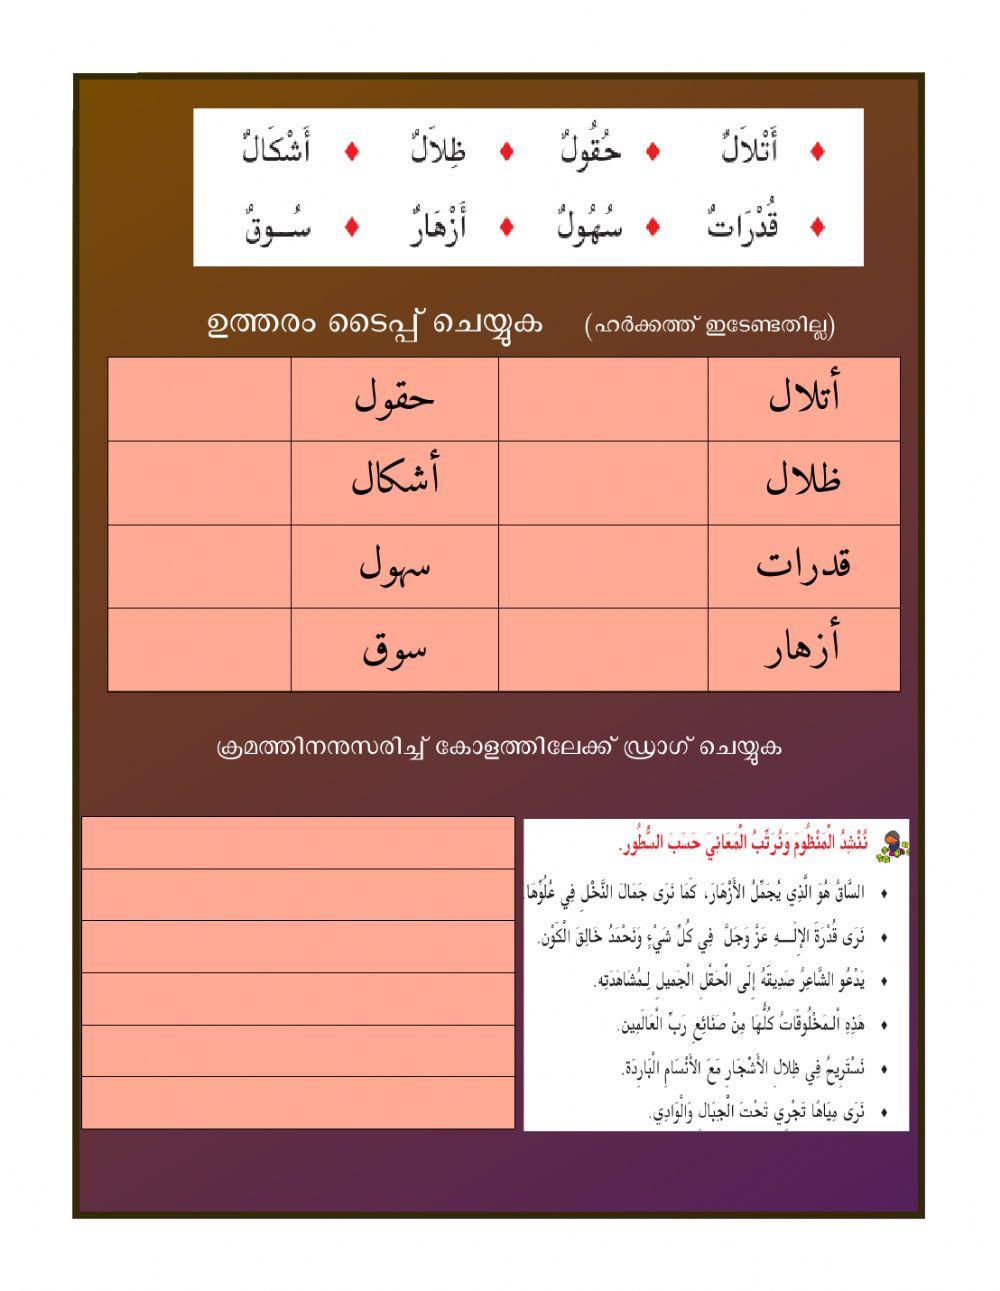 Class 8 arabic worksheet based on first bell